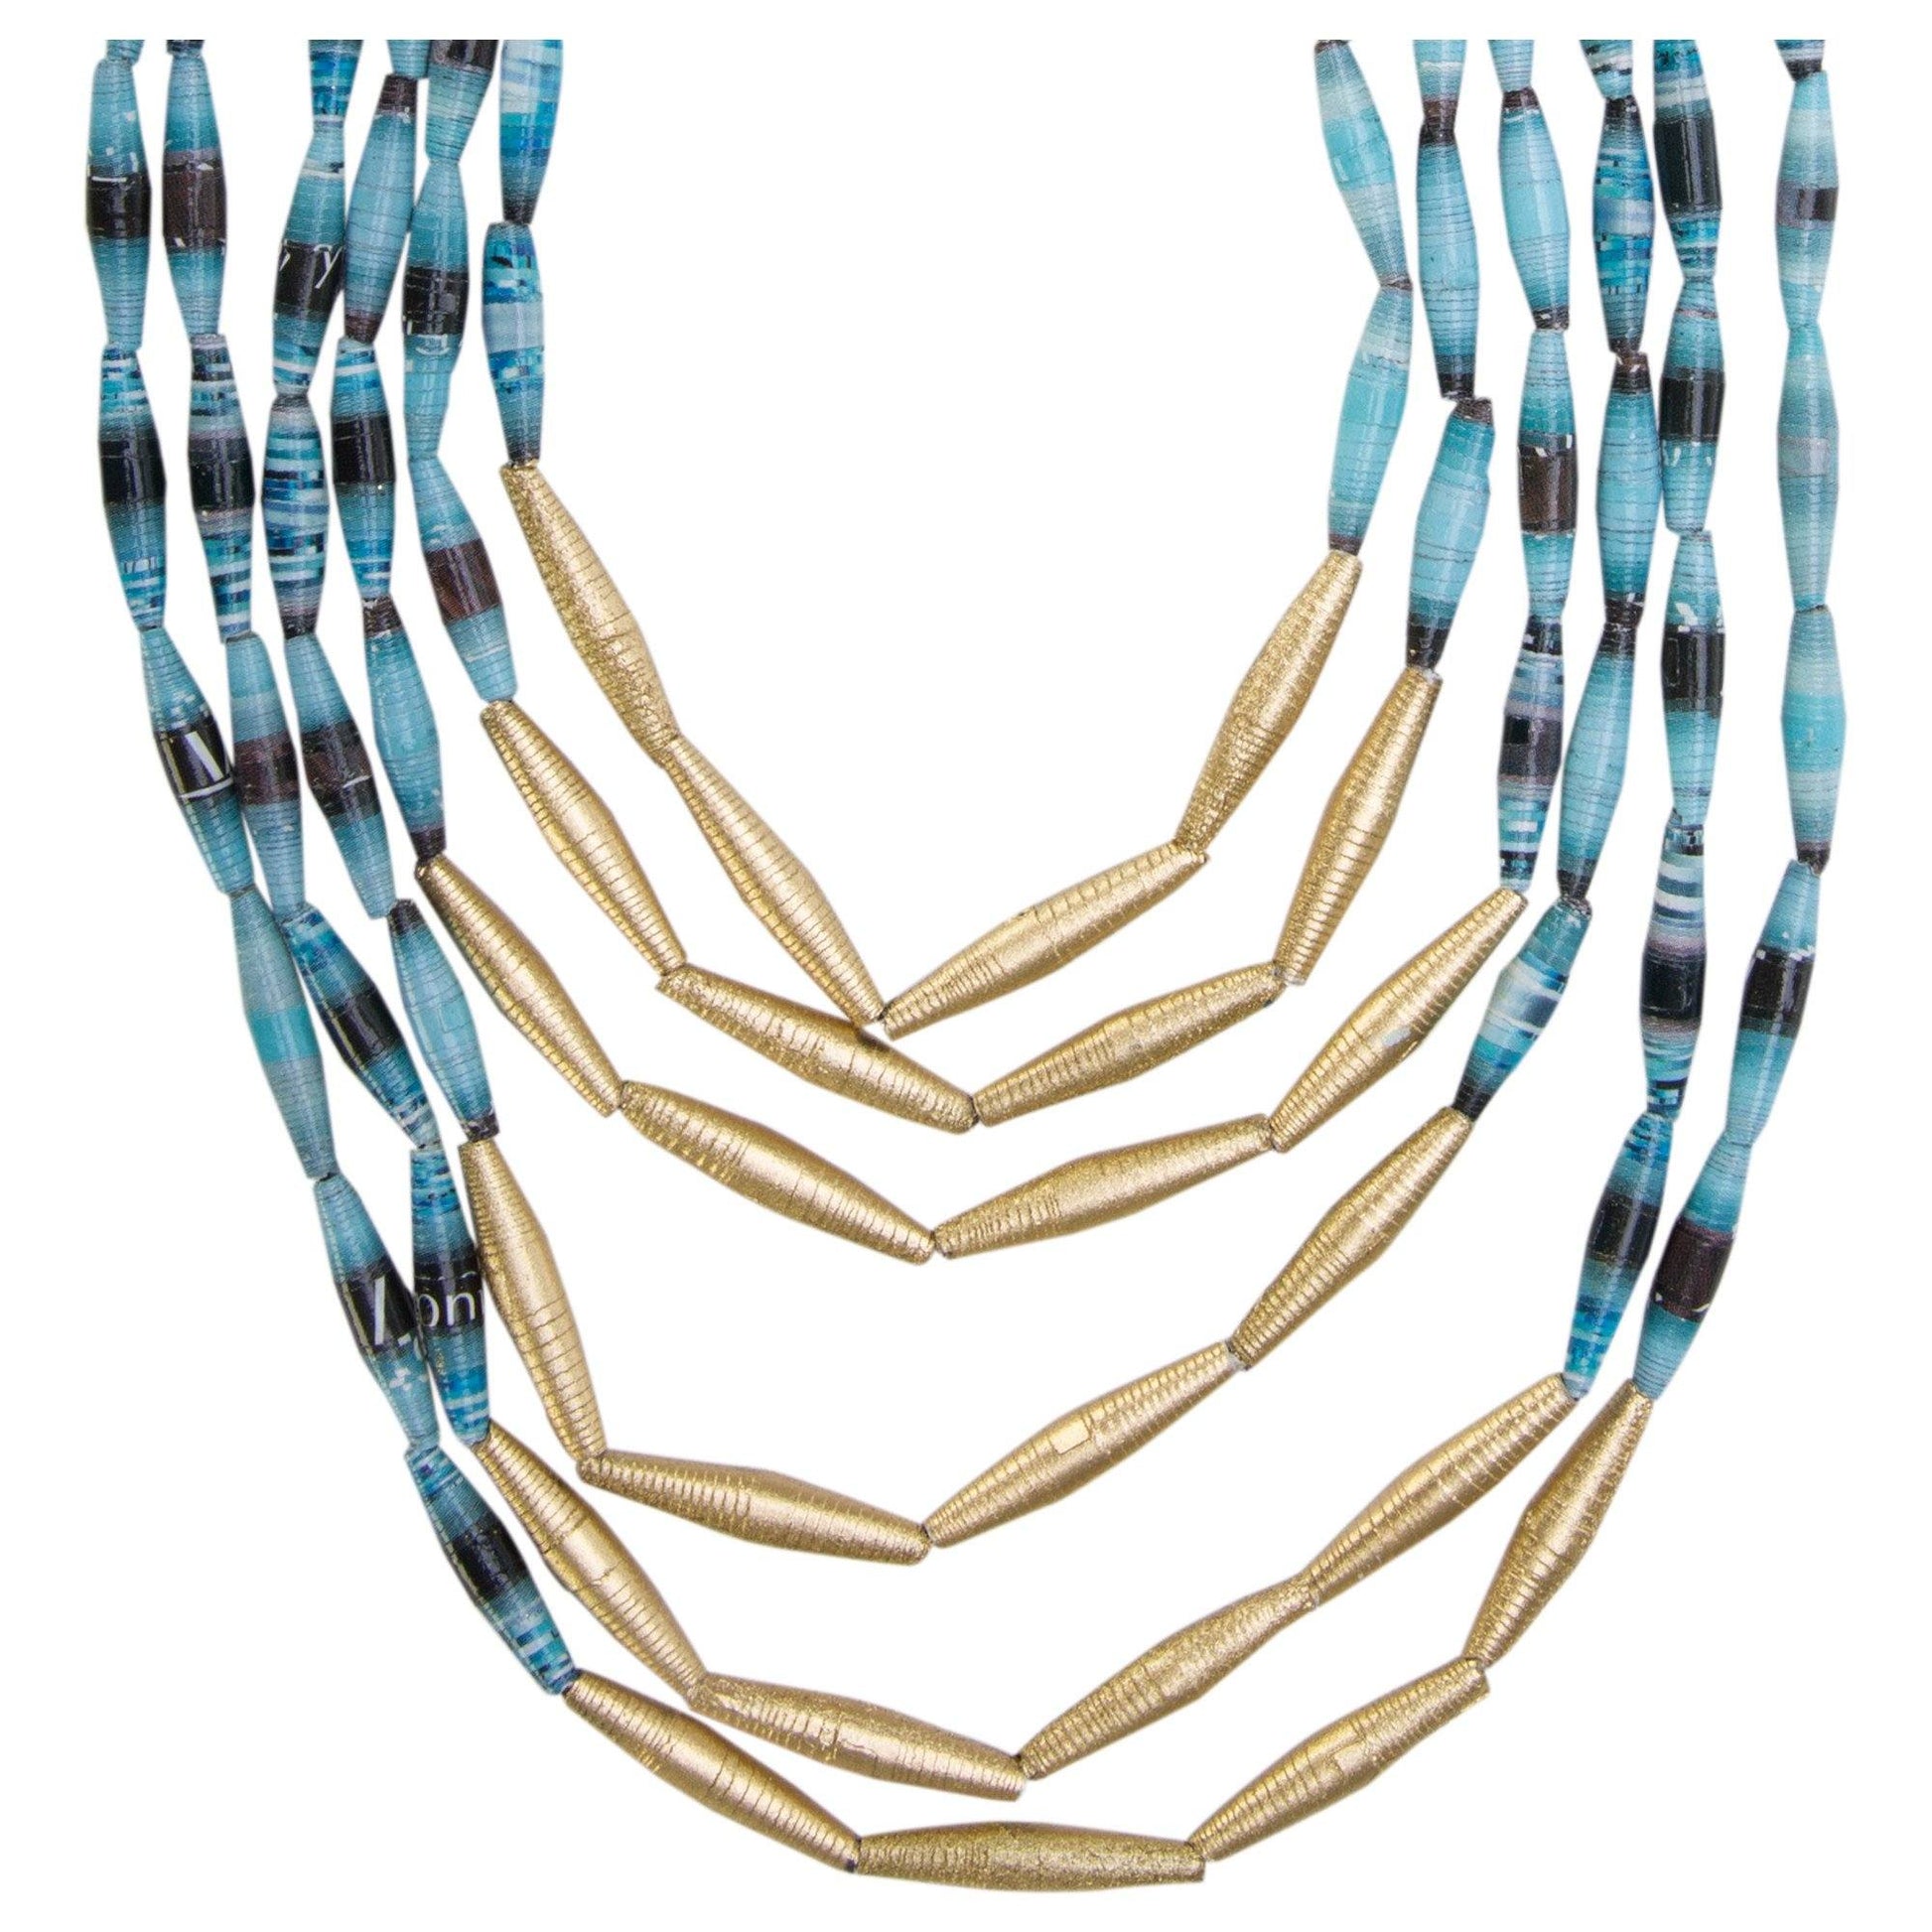 Quazi Long Layers Recycled Necklace